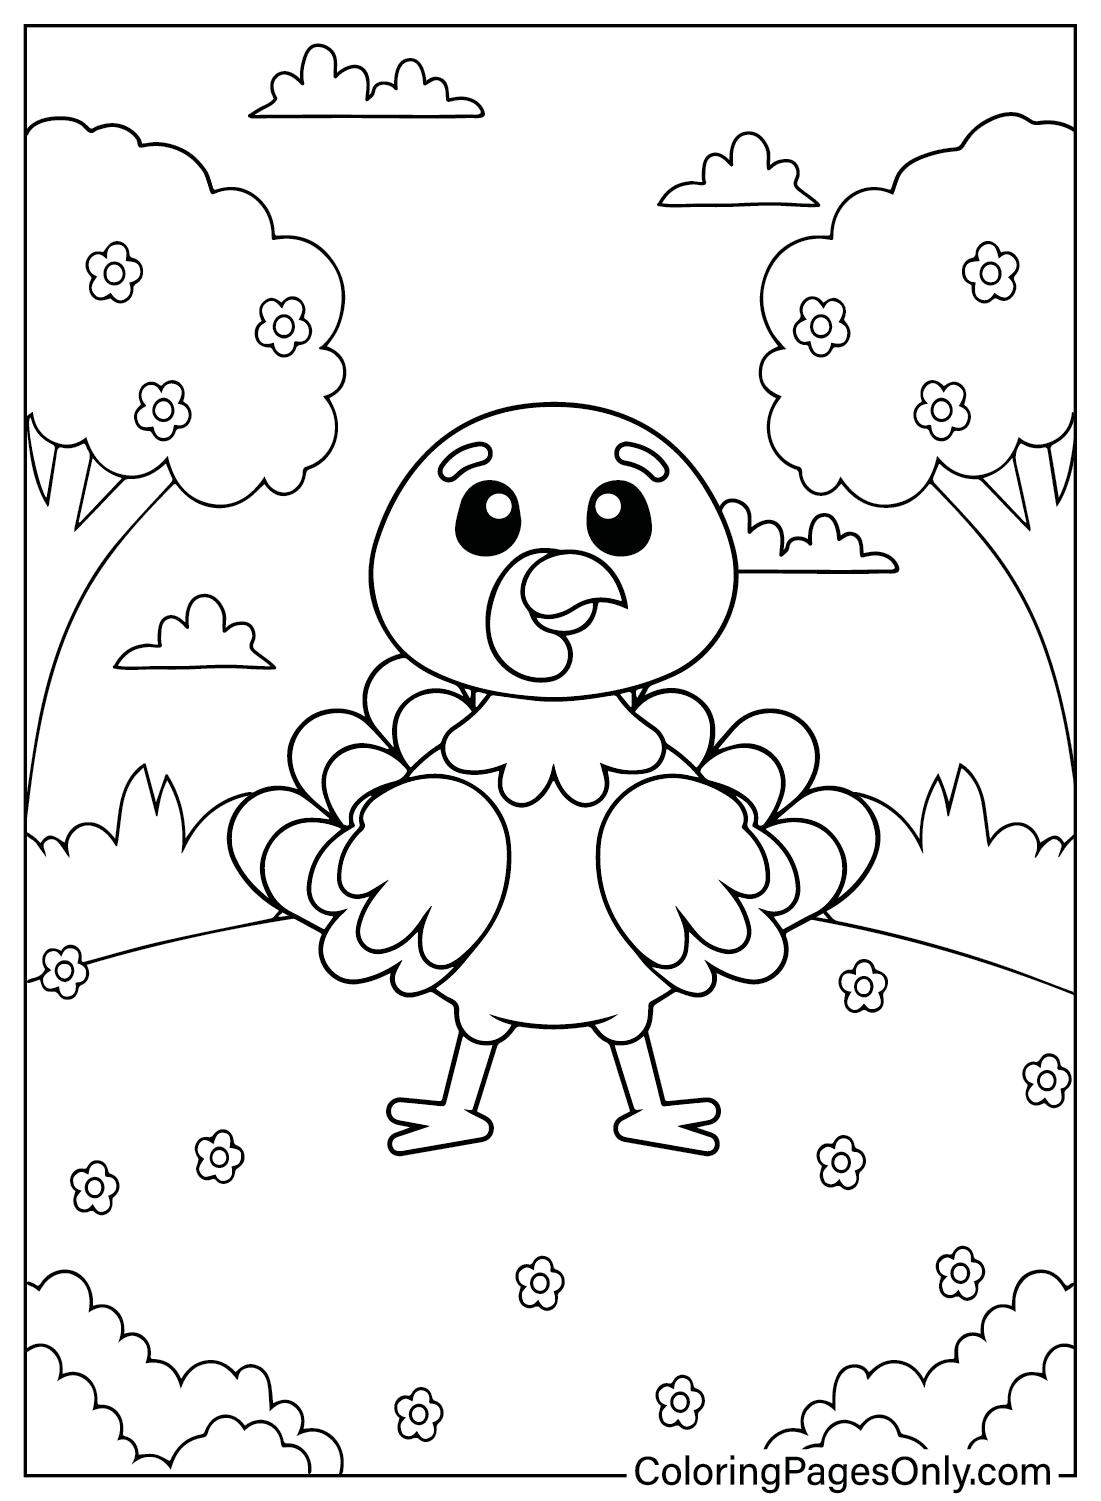 Free Coloring Pages of Turkey from Turkey